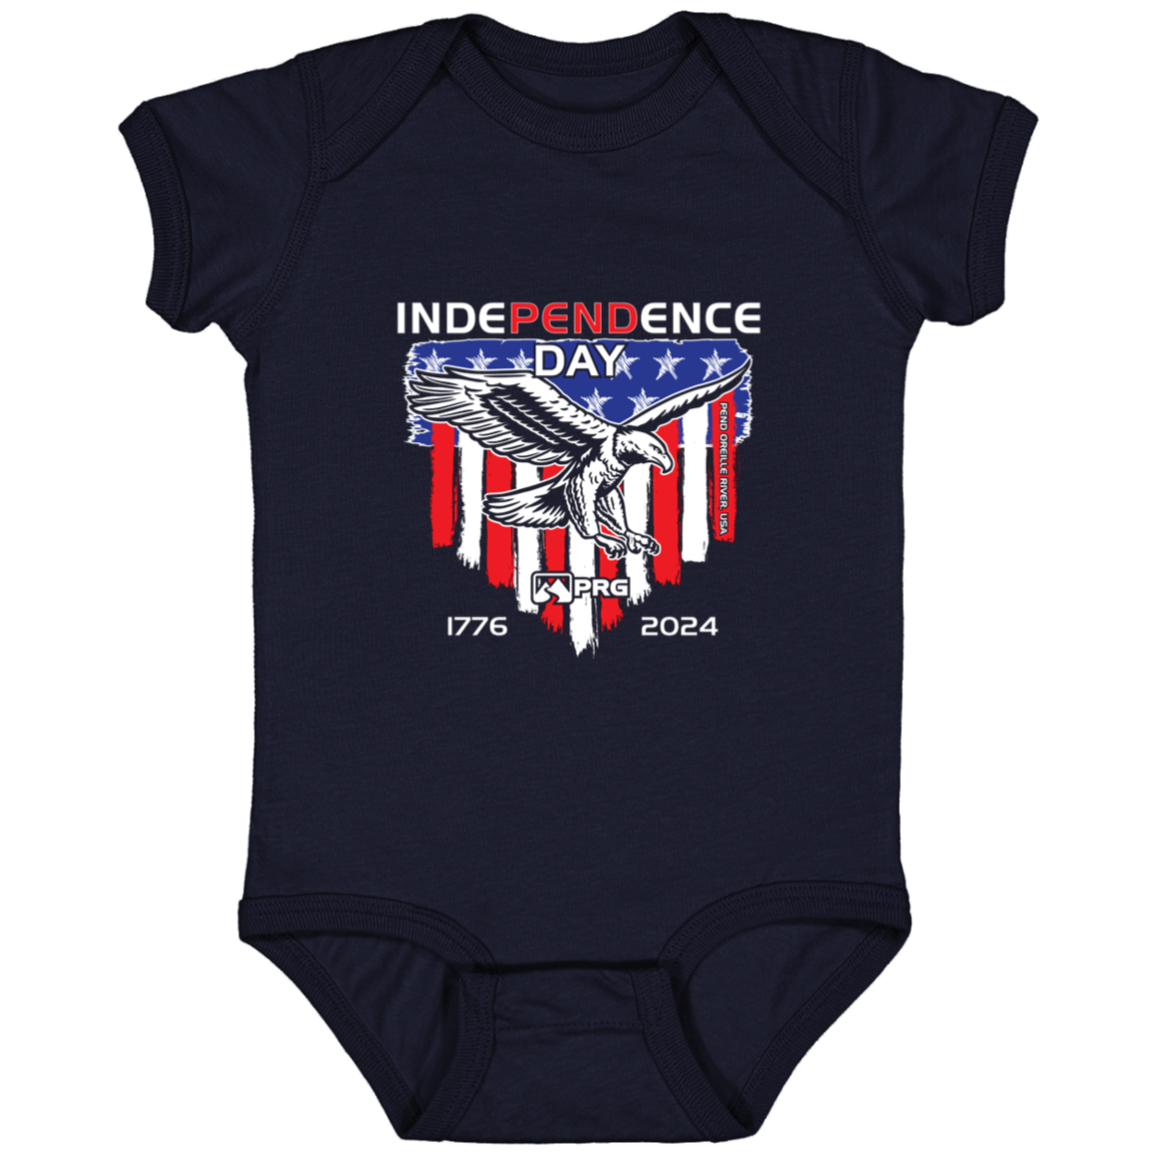 2024 Independence Day - Infant Onesie